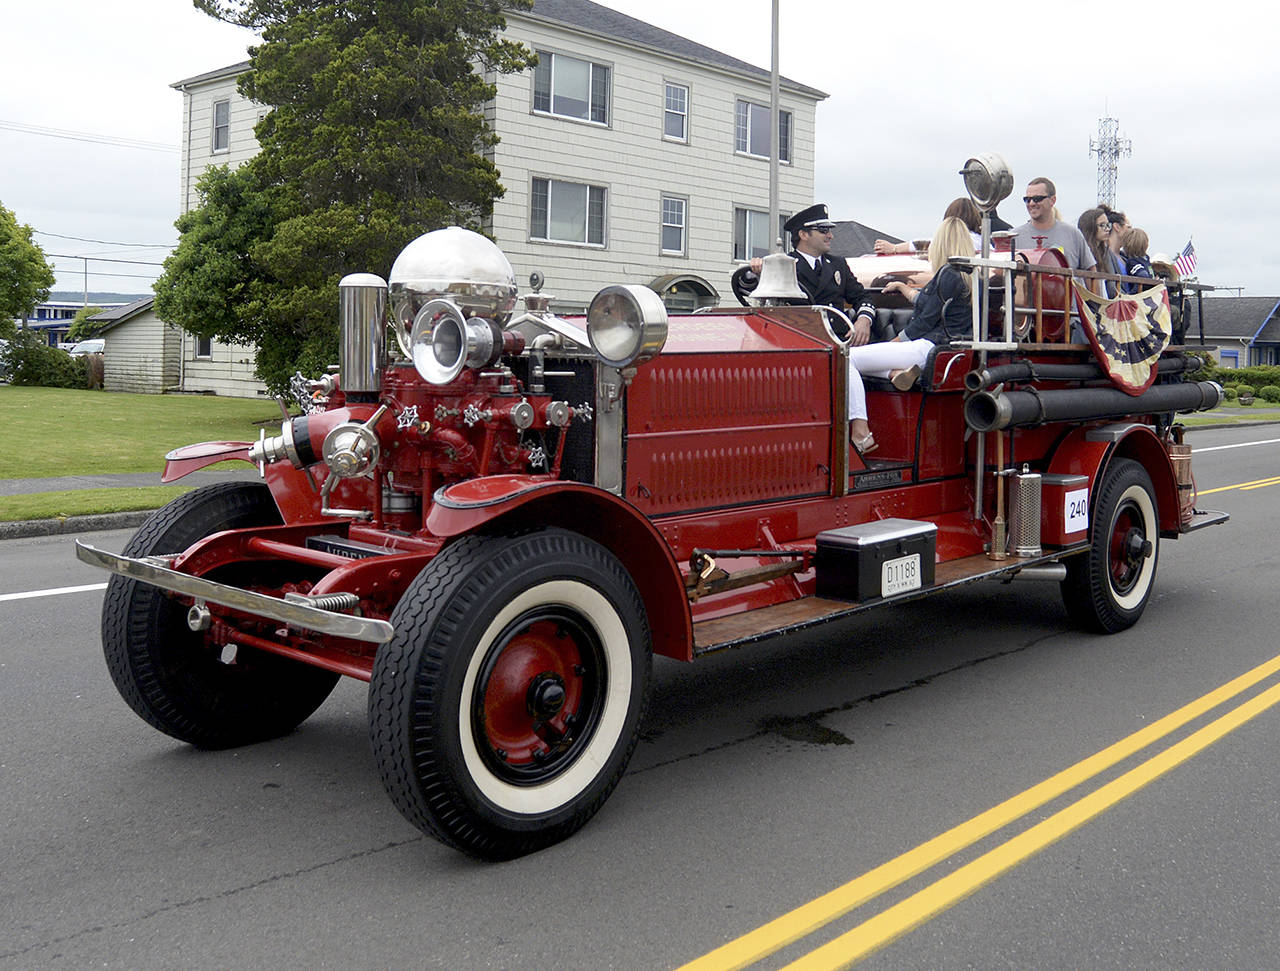 DAN HAMMOCK | THE DAILY WORLD                                Each year, the Aberdeen Fire Department has participated in the Founders Day Parade with this vintage Ahrens Fox fire engine. Although it was damaged in the Aberdeen Museum of History fire June 9, it is drivable and will make an appearance this year.